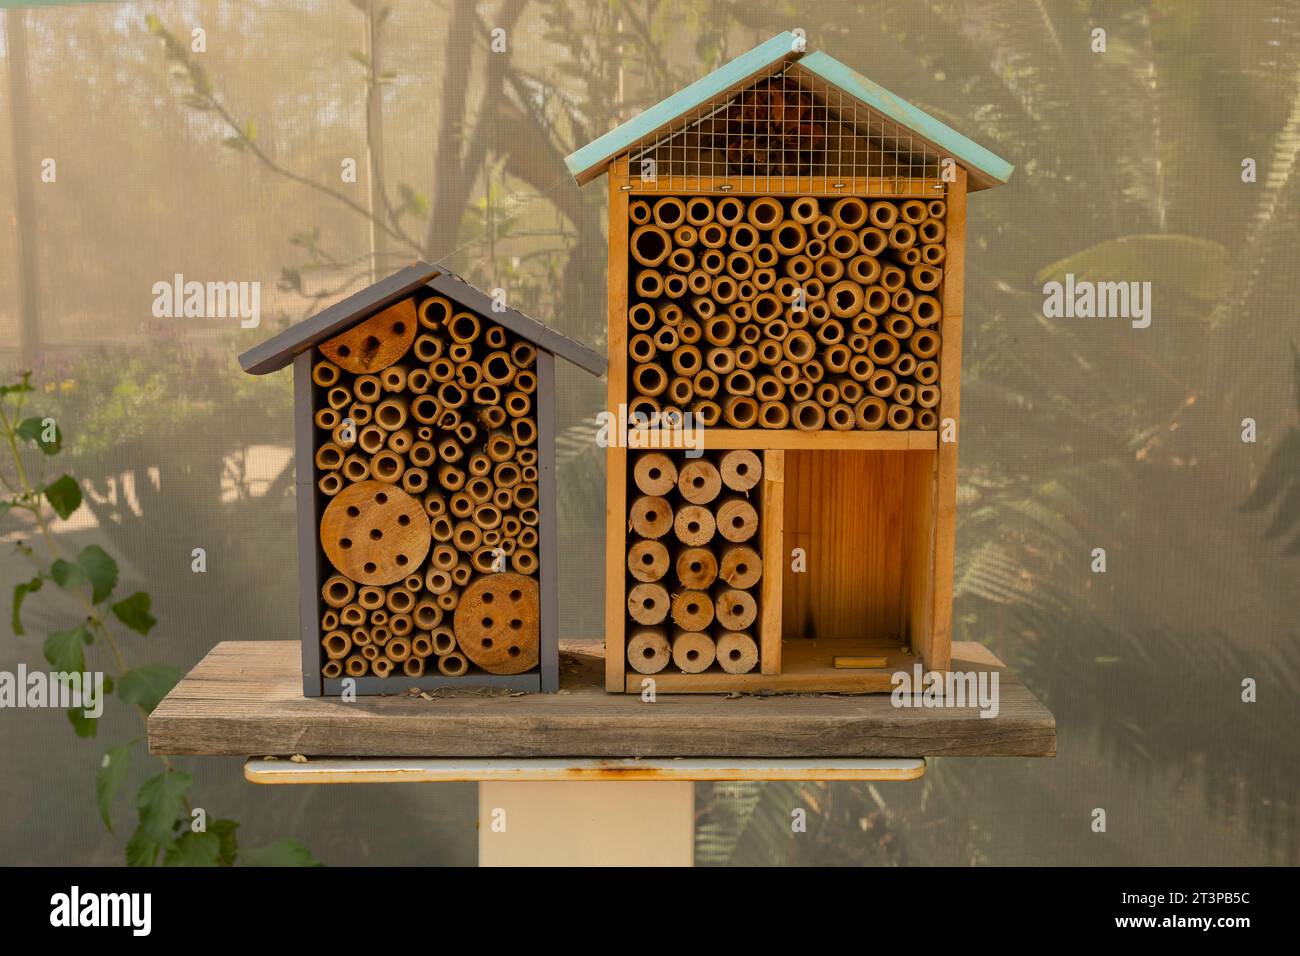 Wooden Insect House, Decorative Bug Hotel, Ladybird And Bee, Fly. Compartments And Natural Components. Outdoor Eco Home For Butterfly Hibernation And Stock Photo